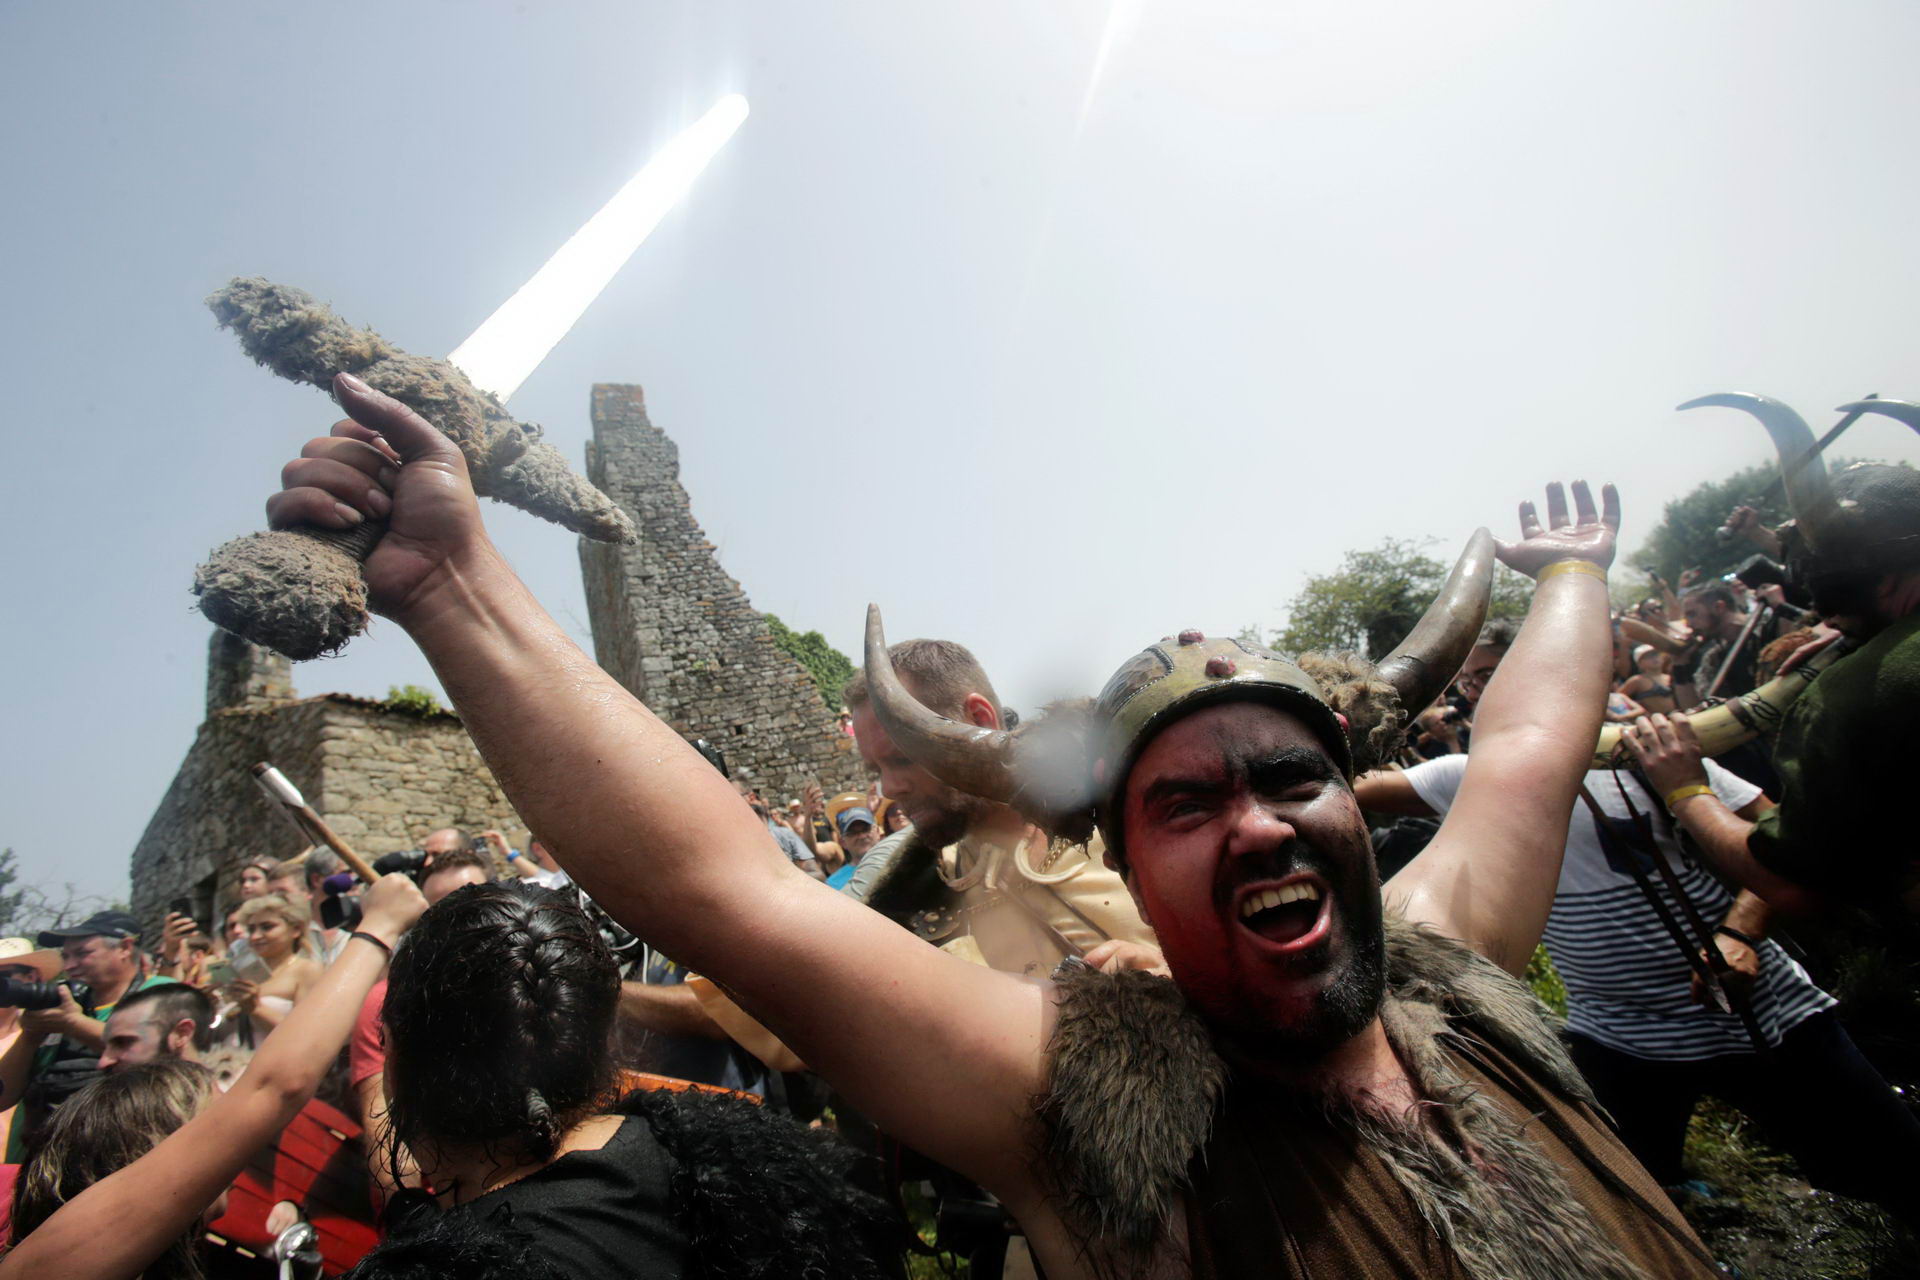 During the 58th Viking Festival in Catoira, Spain, people dressed as Vikings and villagers re-enact the Viking invasion of Galicia's coast. The residents participate in the historical defeat of King Ulfo's Viking invaders by Bishops Cresconio's troops.